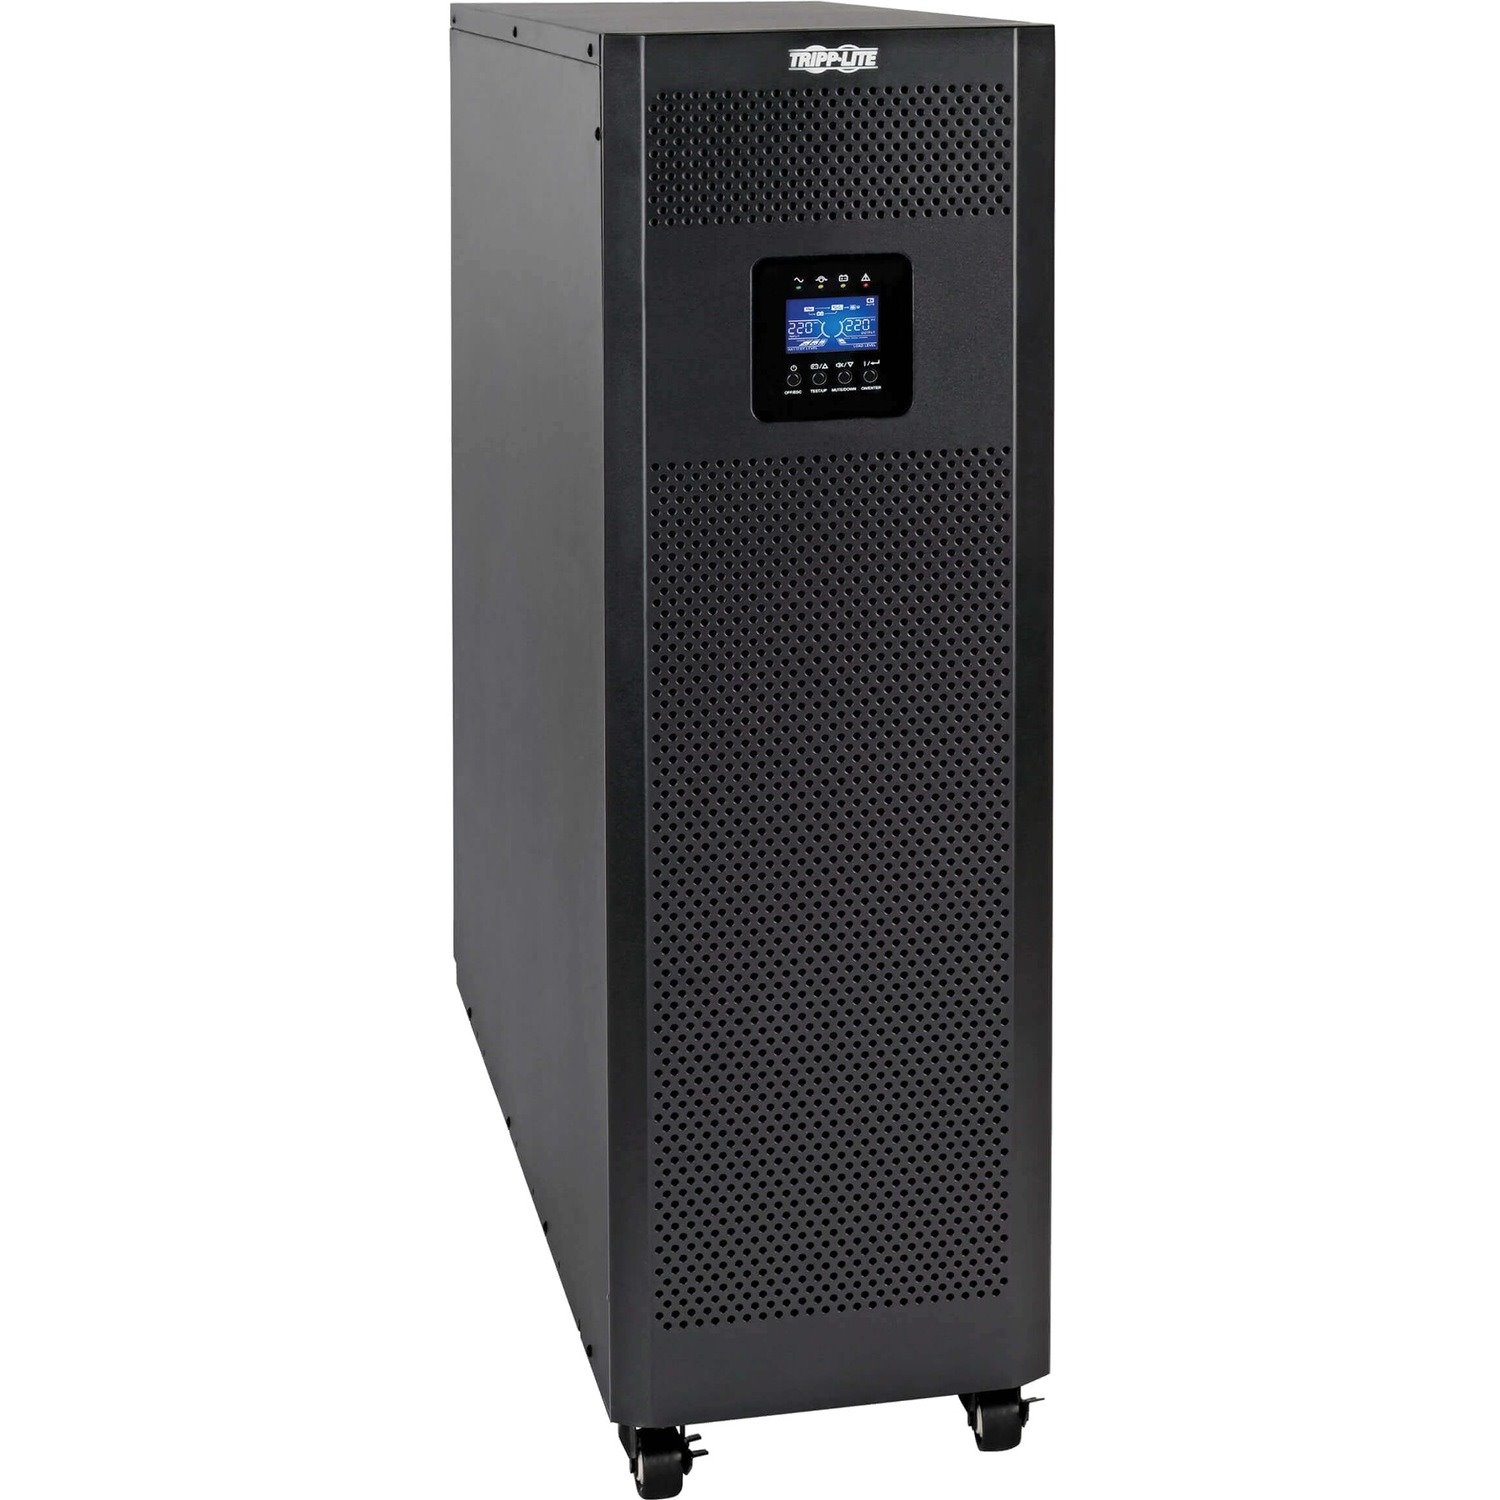 Tripp Lite SmartOnline S3MX Series 3-Phase 380/400/415V 30kVA 27kW On-Line Double-Conversion UPS, Parallel for Capacity and Redundancy, Single & Dual AC Input, No Internal Batteries